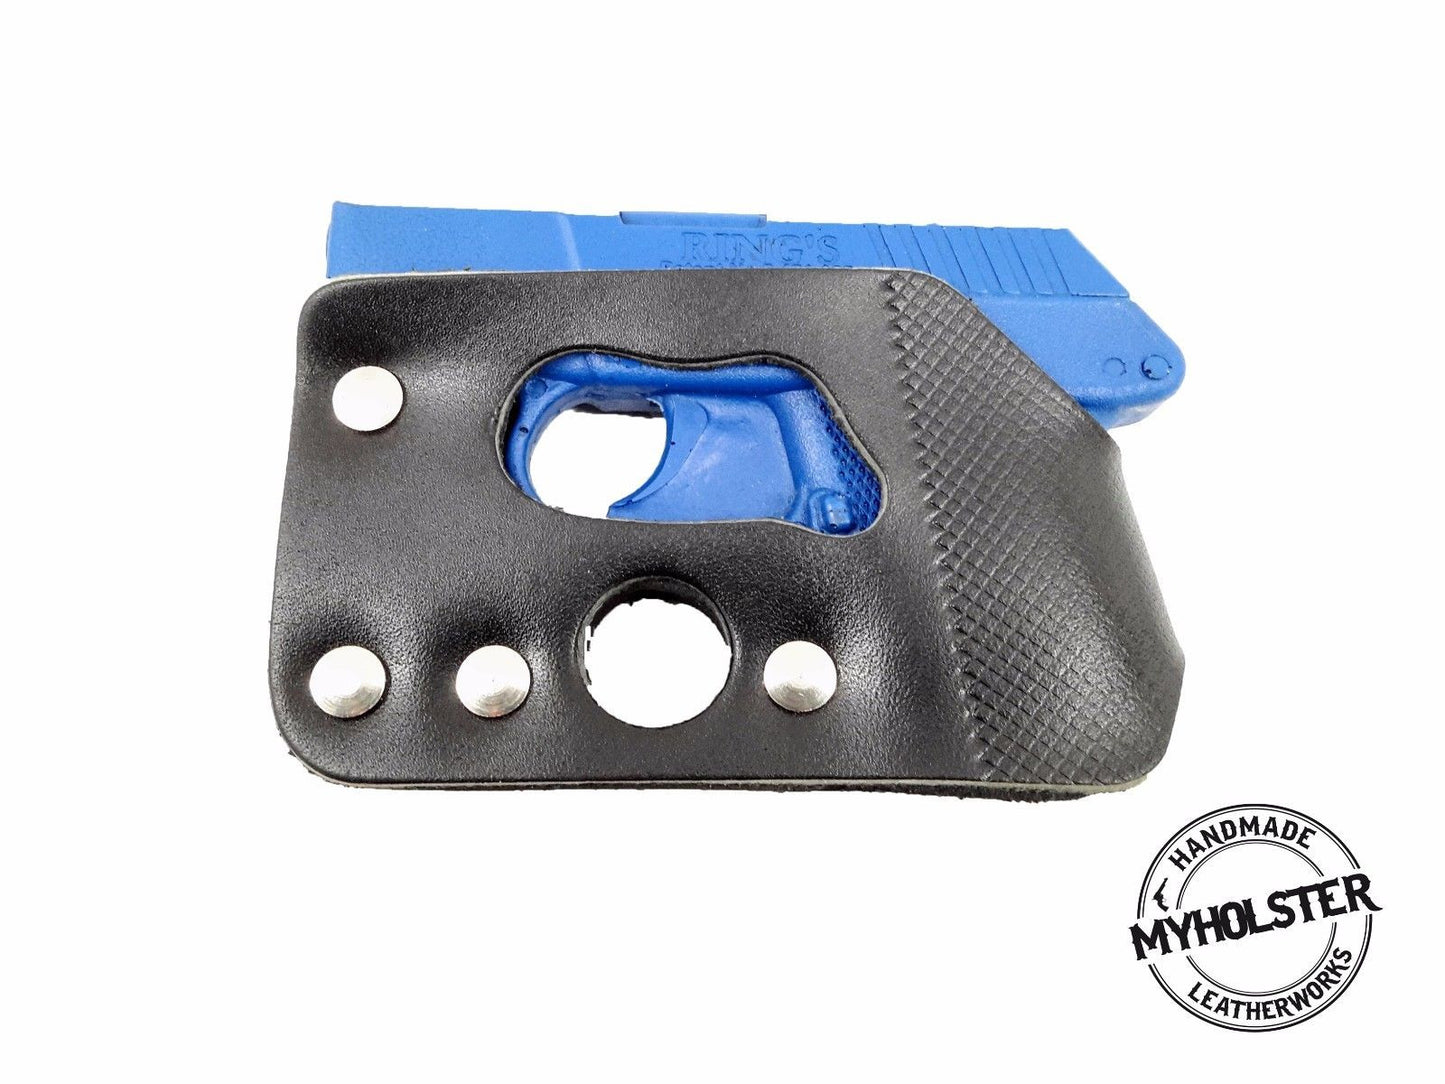 Concealed Carry Shoot-Through Wallet Holster for Ruger LCP 380 & Kel-Tec P-3AT